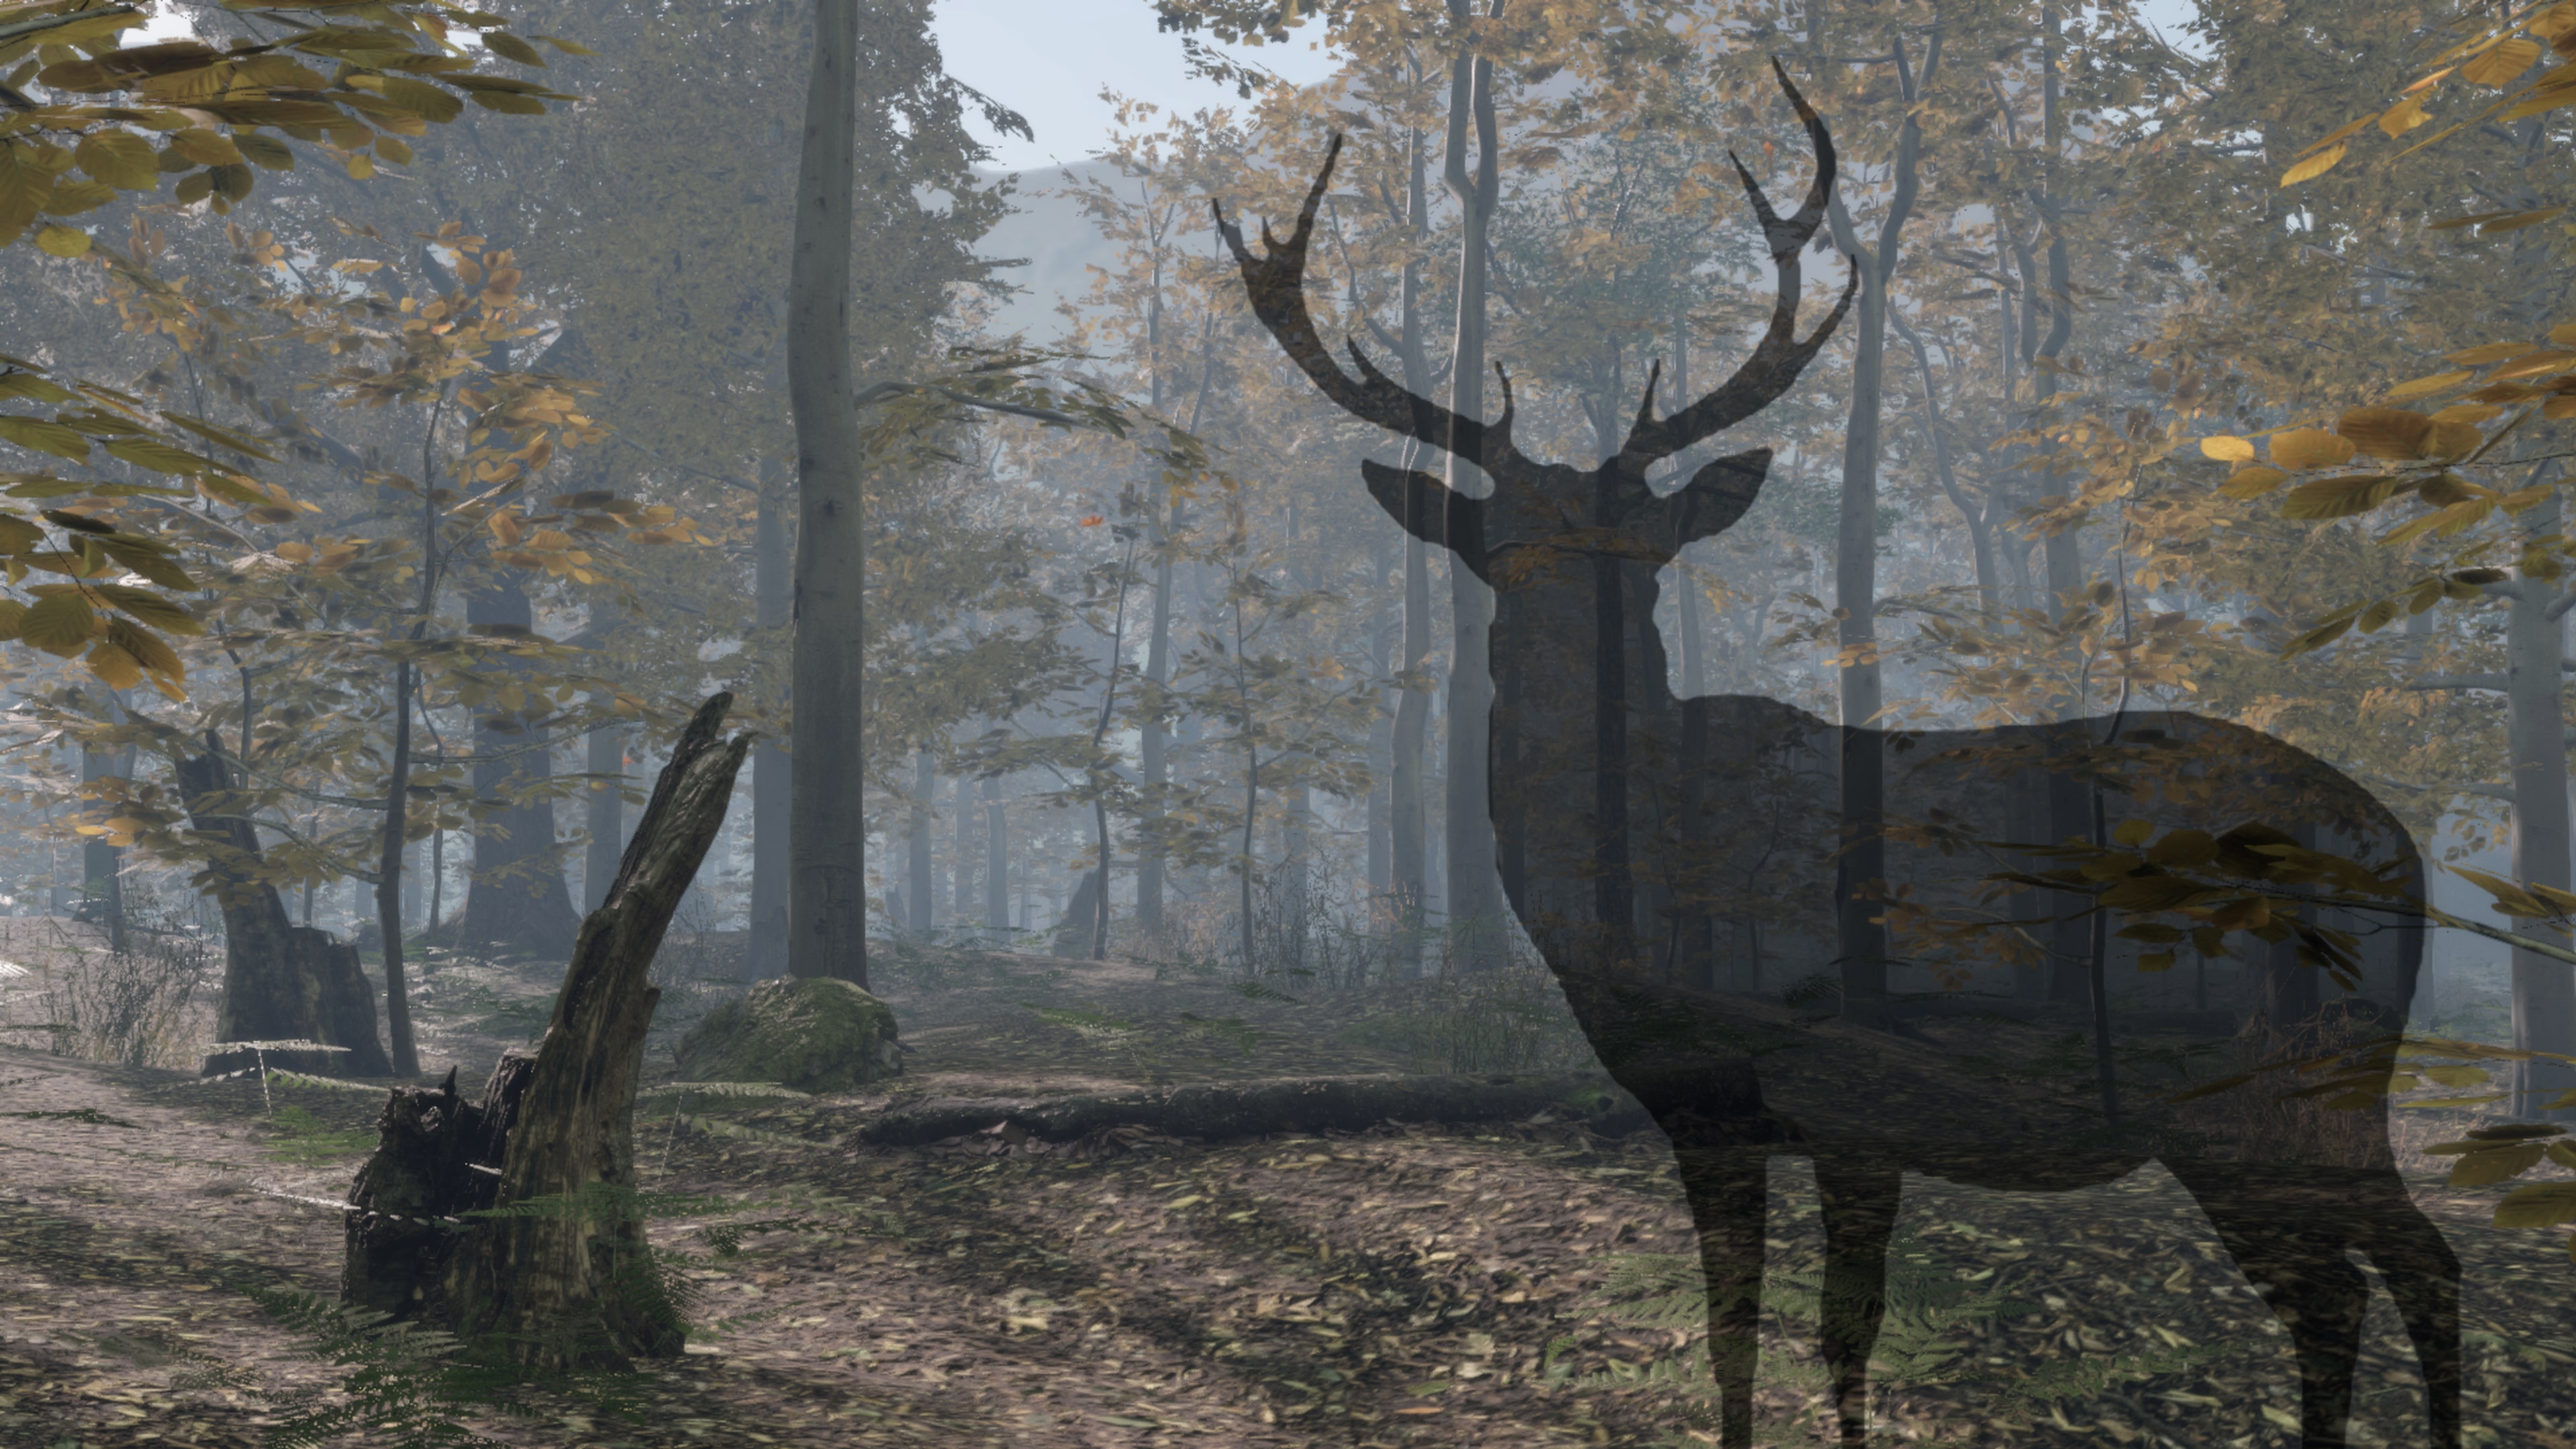 Hunting ps4. Pro Deer Hunting 2. Hunters Hunted 2. Forest Hunt 2 Коззи. The King Henry 8 Deer Hunted in my near Palace near.